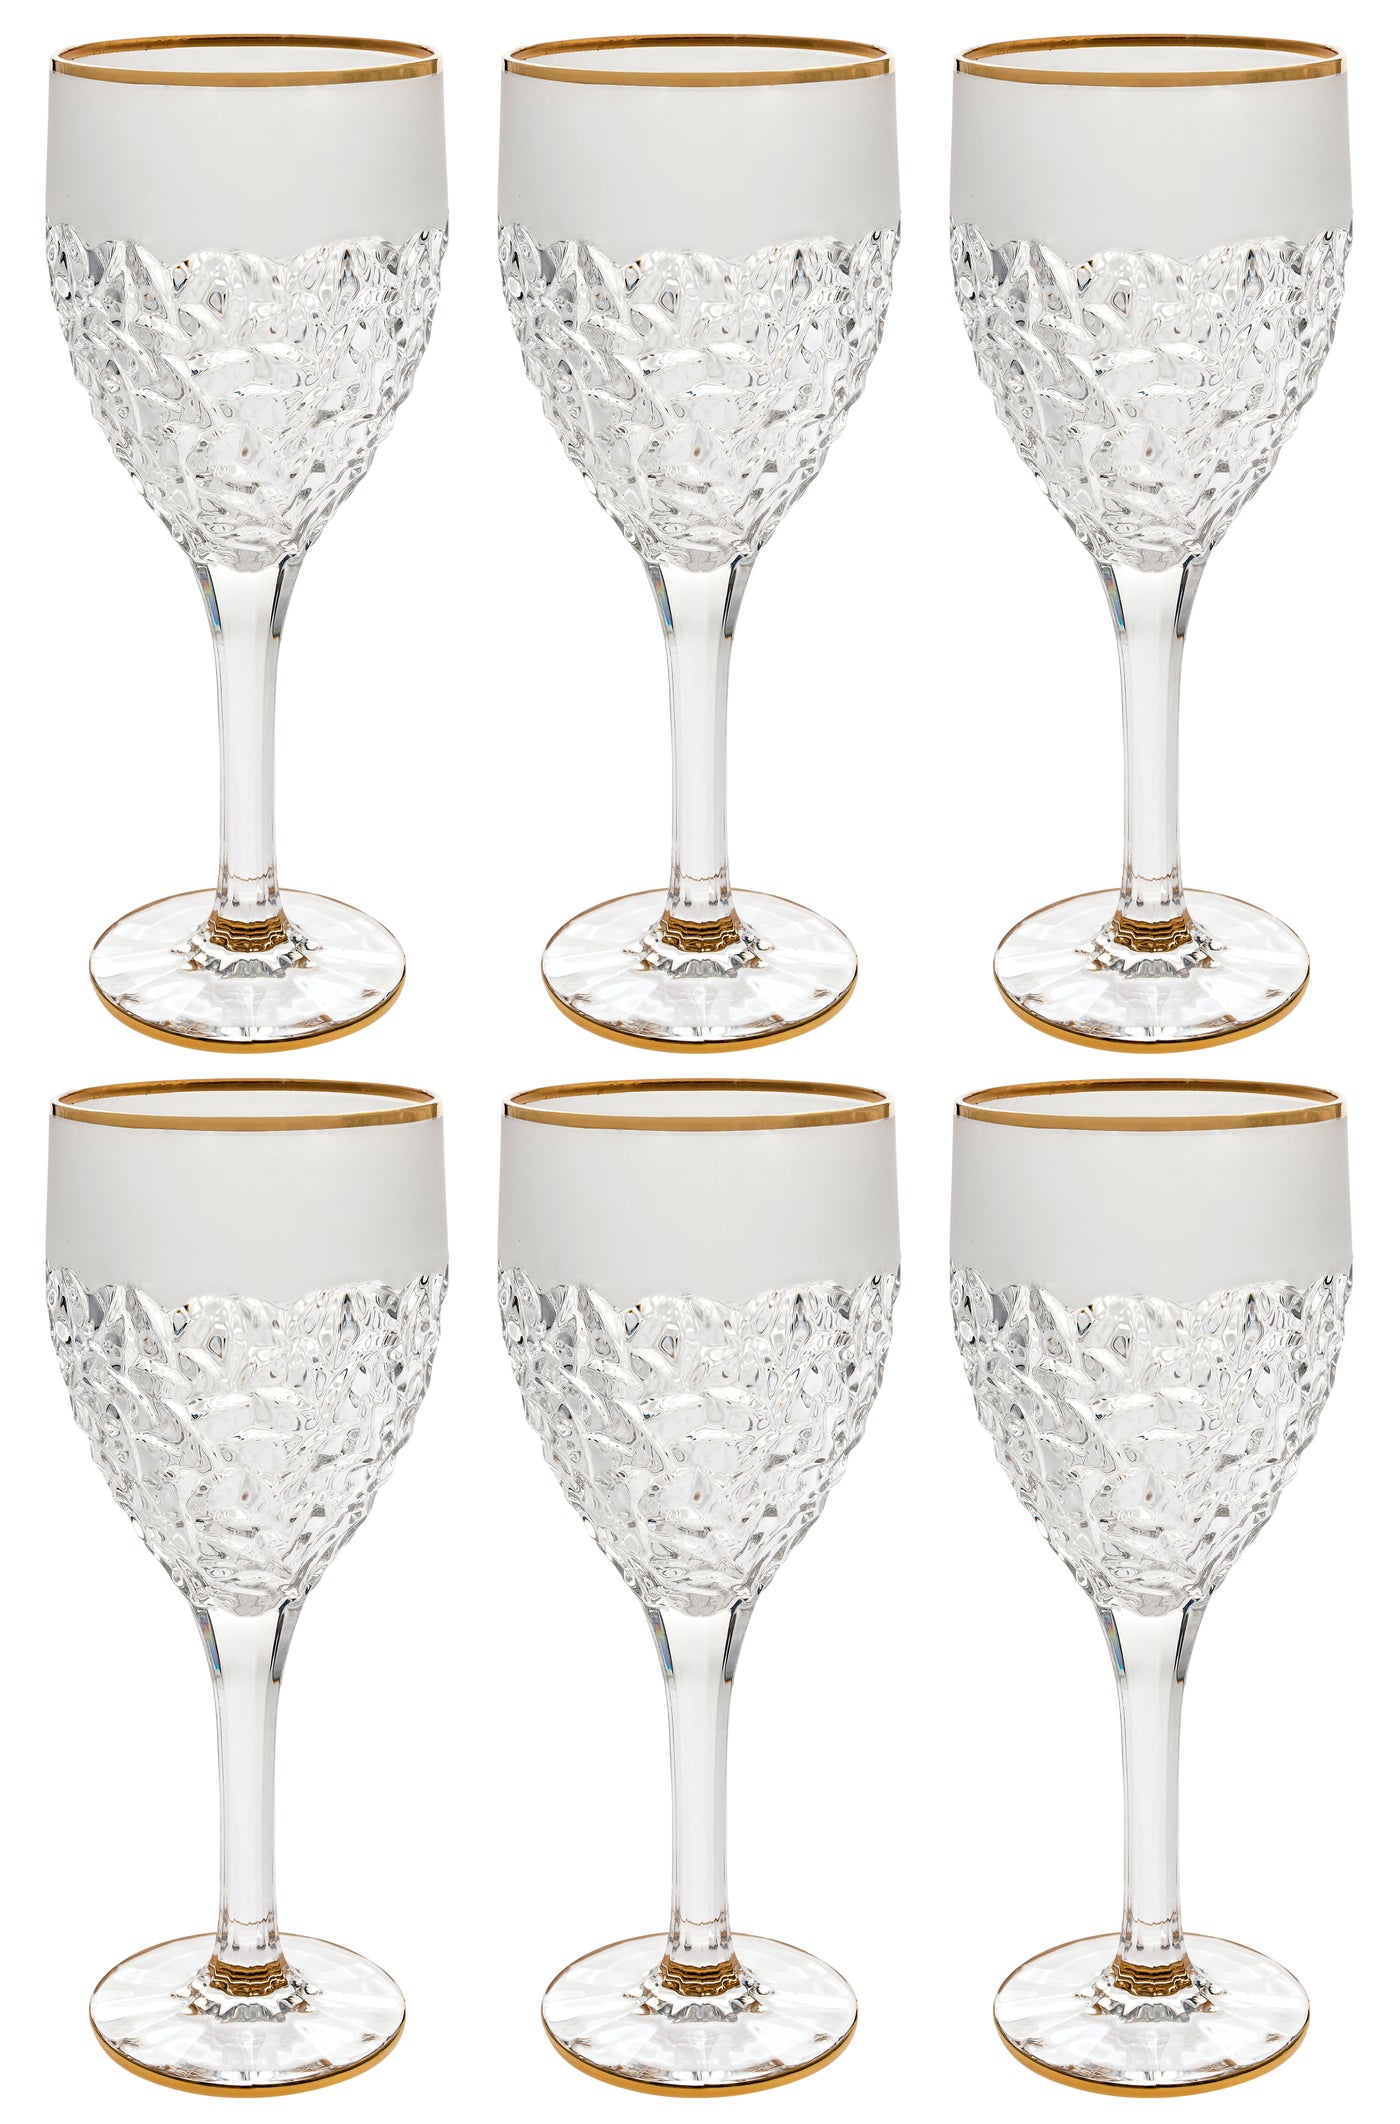 Set of 6 Short Stem Water Glasses with Gold Rim